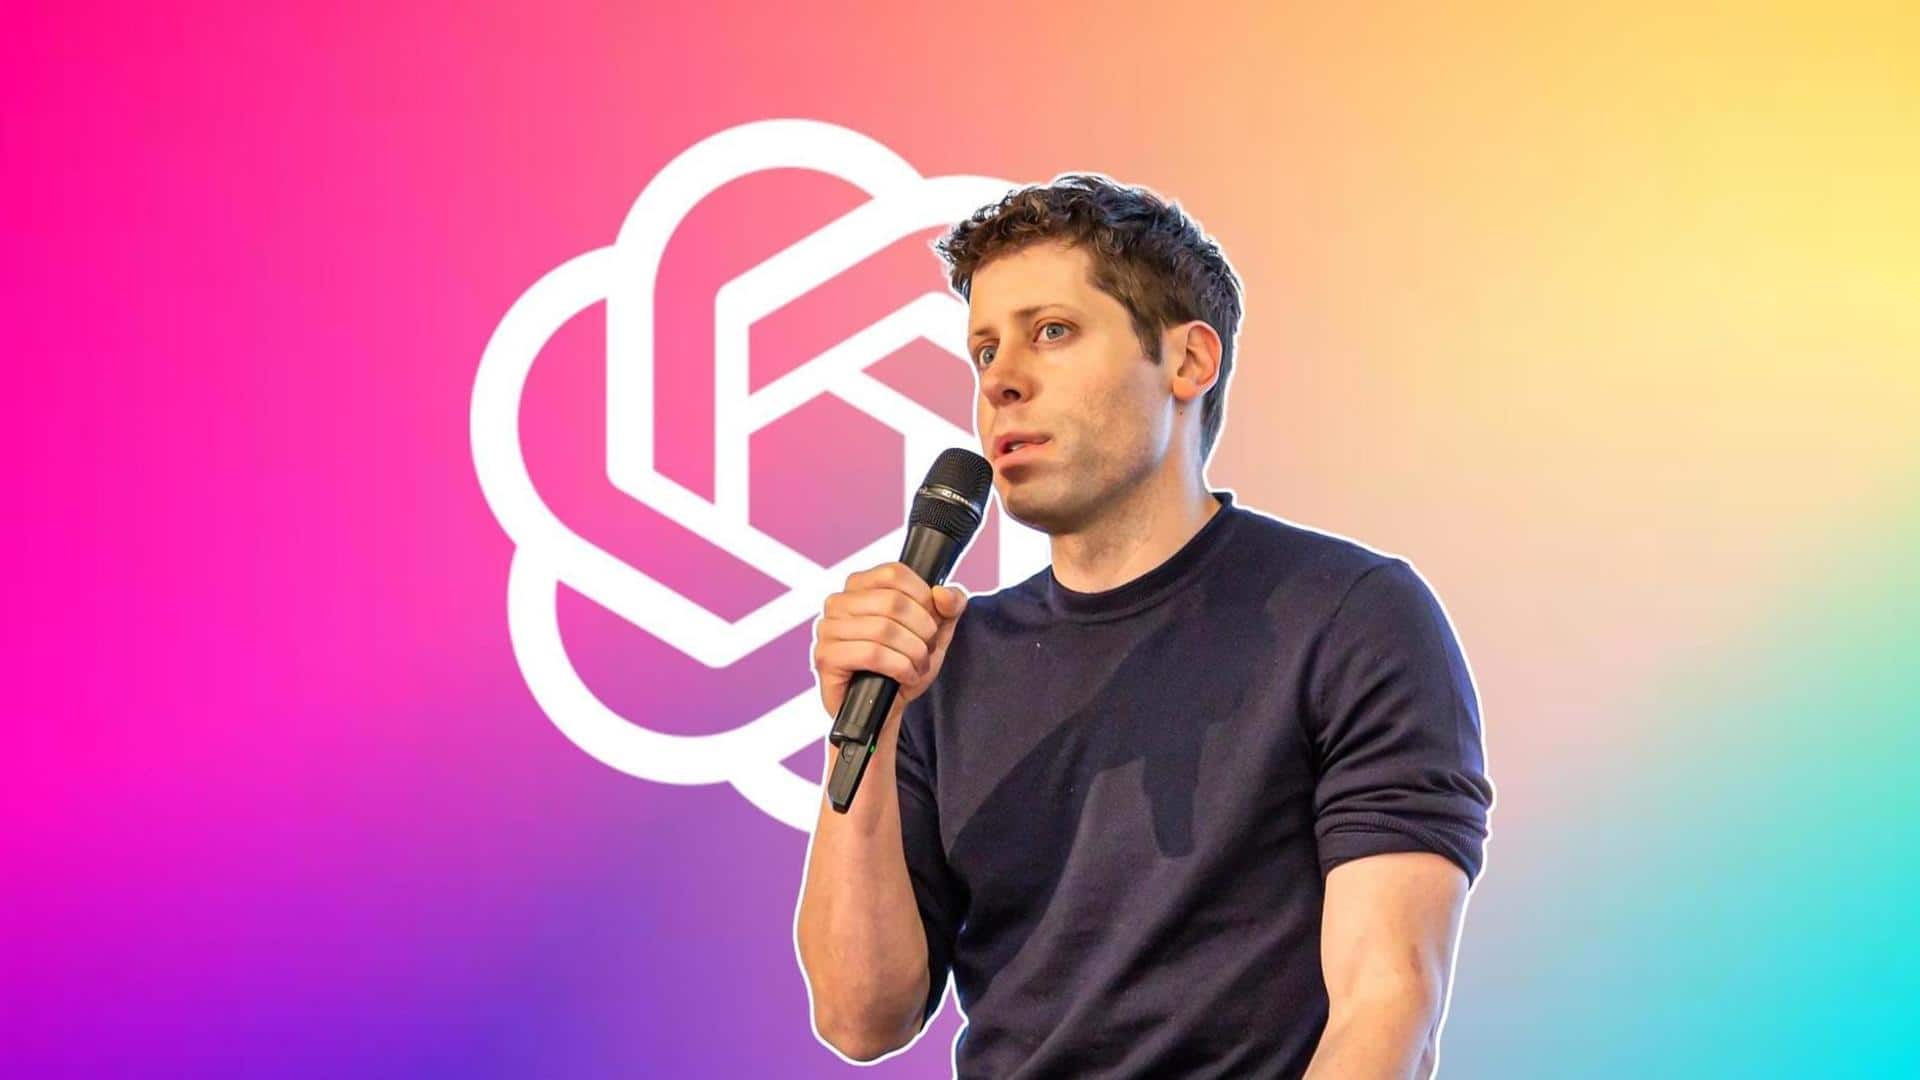 Why did Sam Altman invest $180mn in mysterious anti-aging company